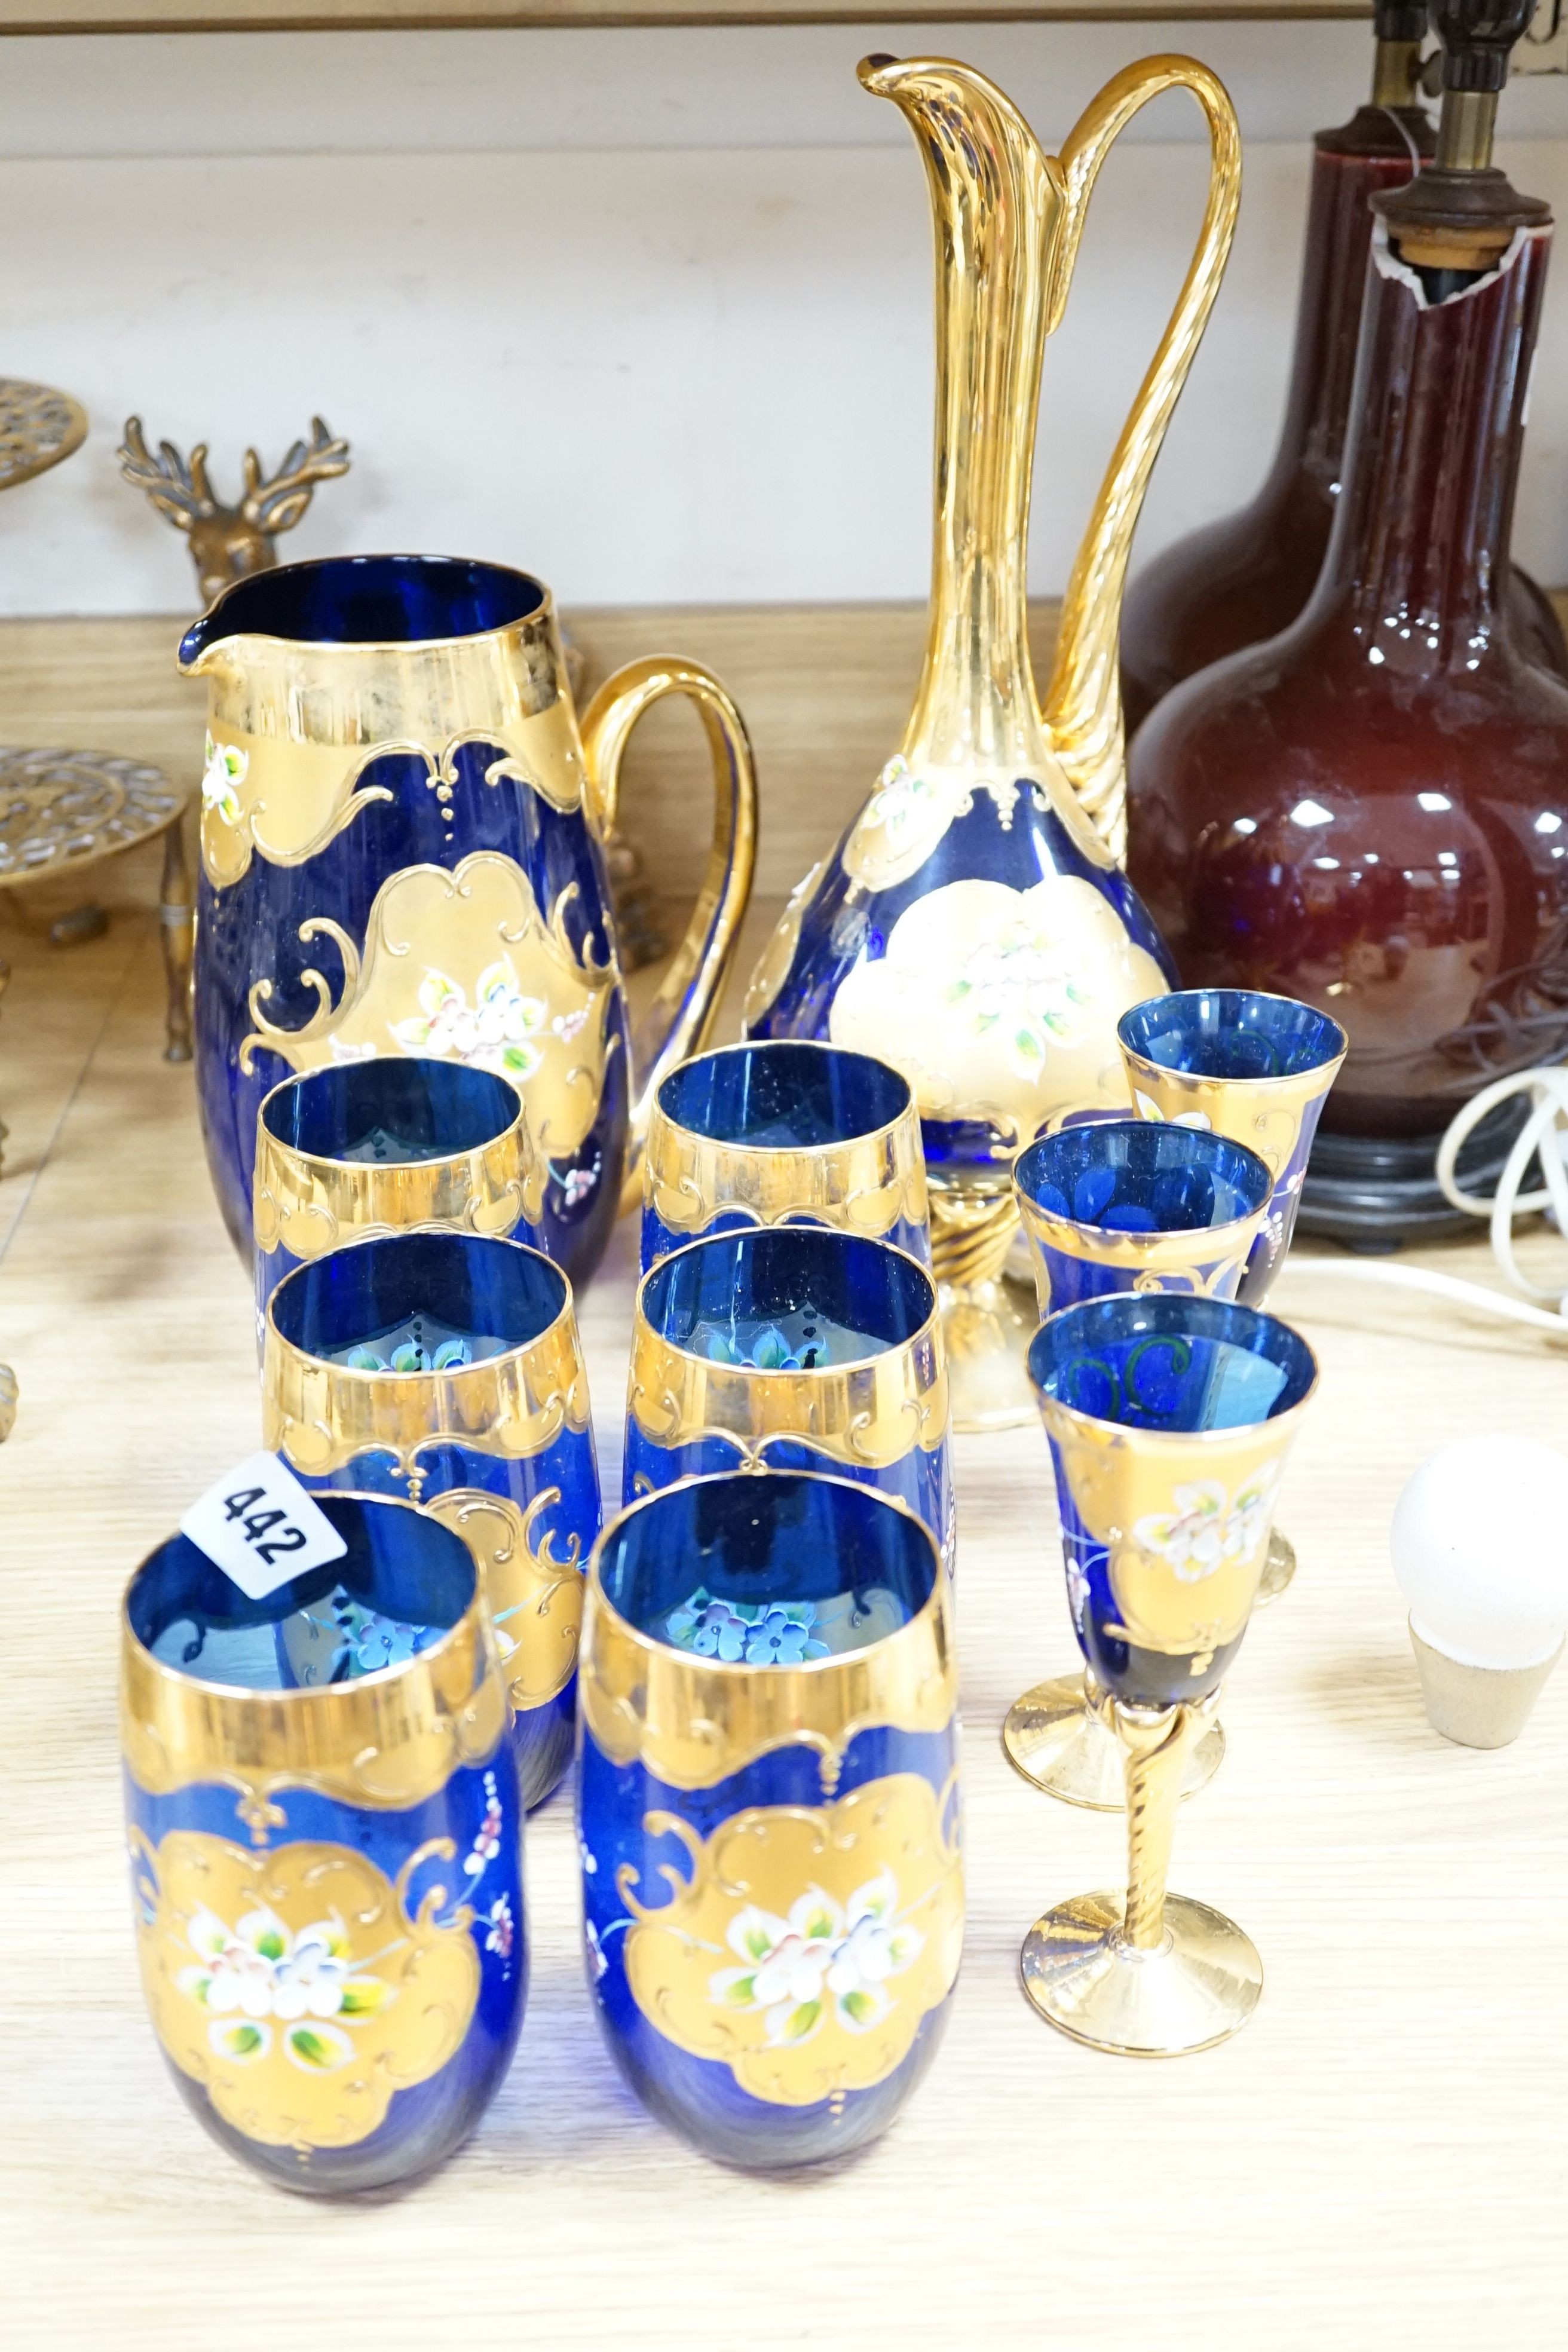 A collection of Venetian coloured and gilded glassware